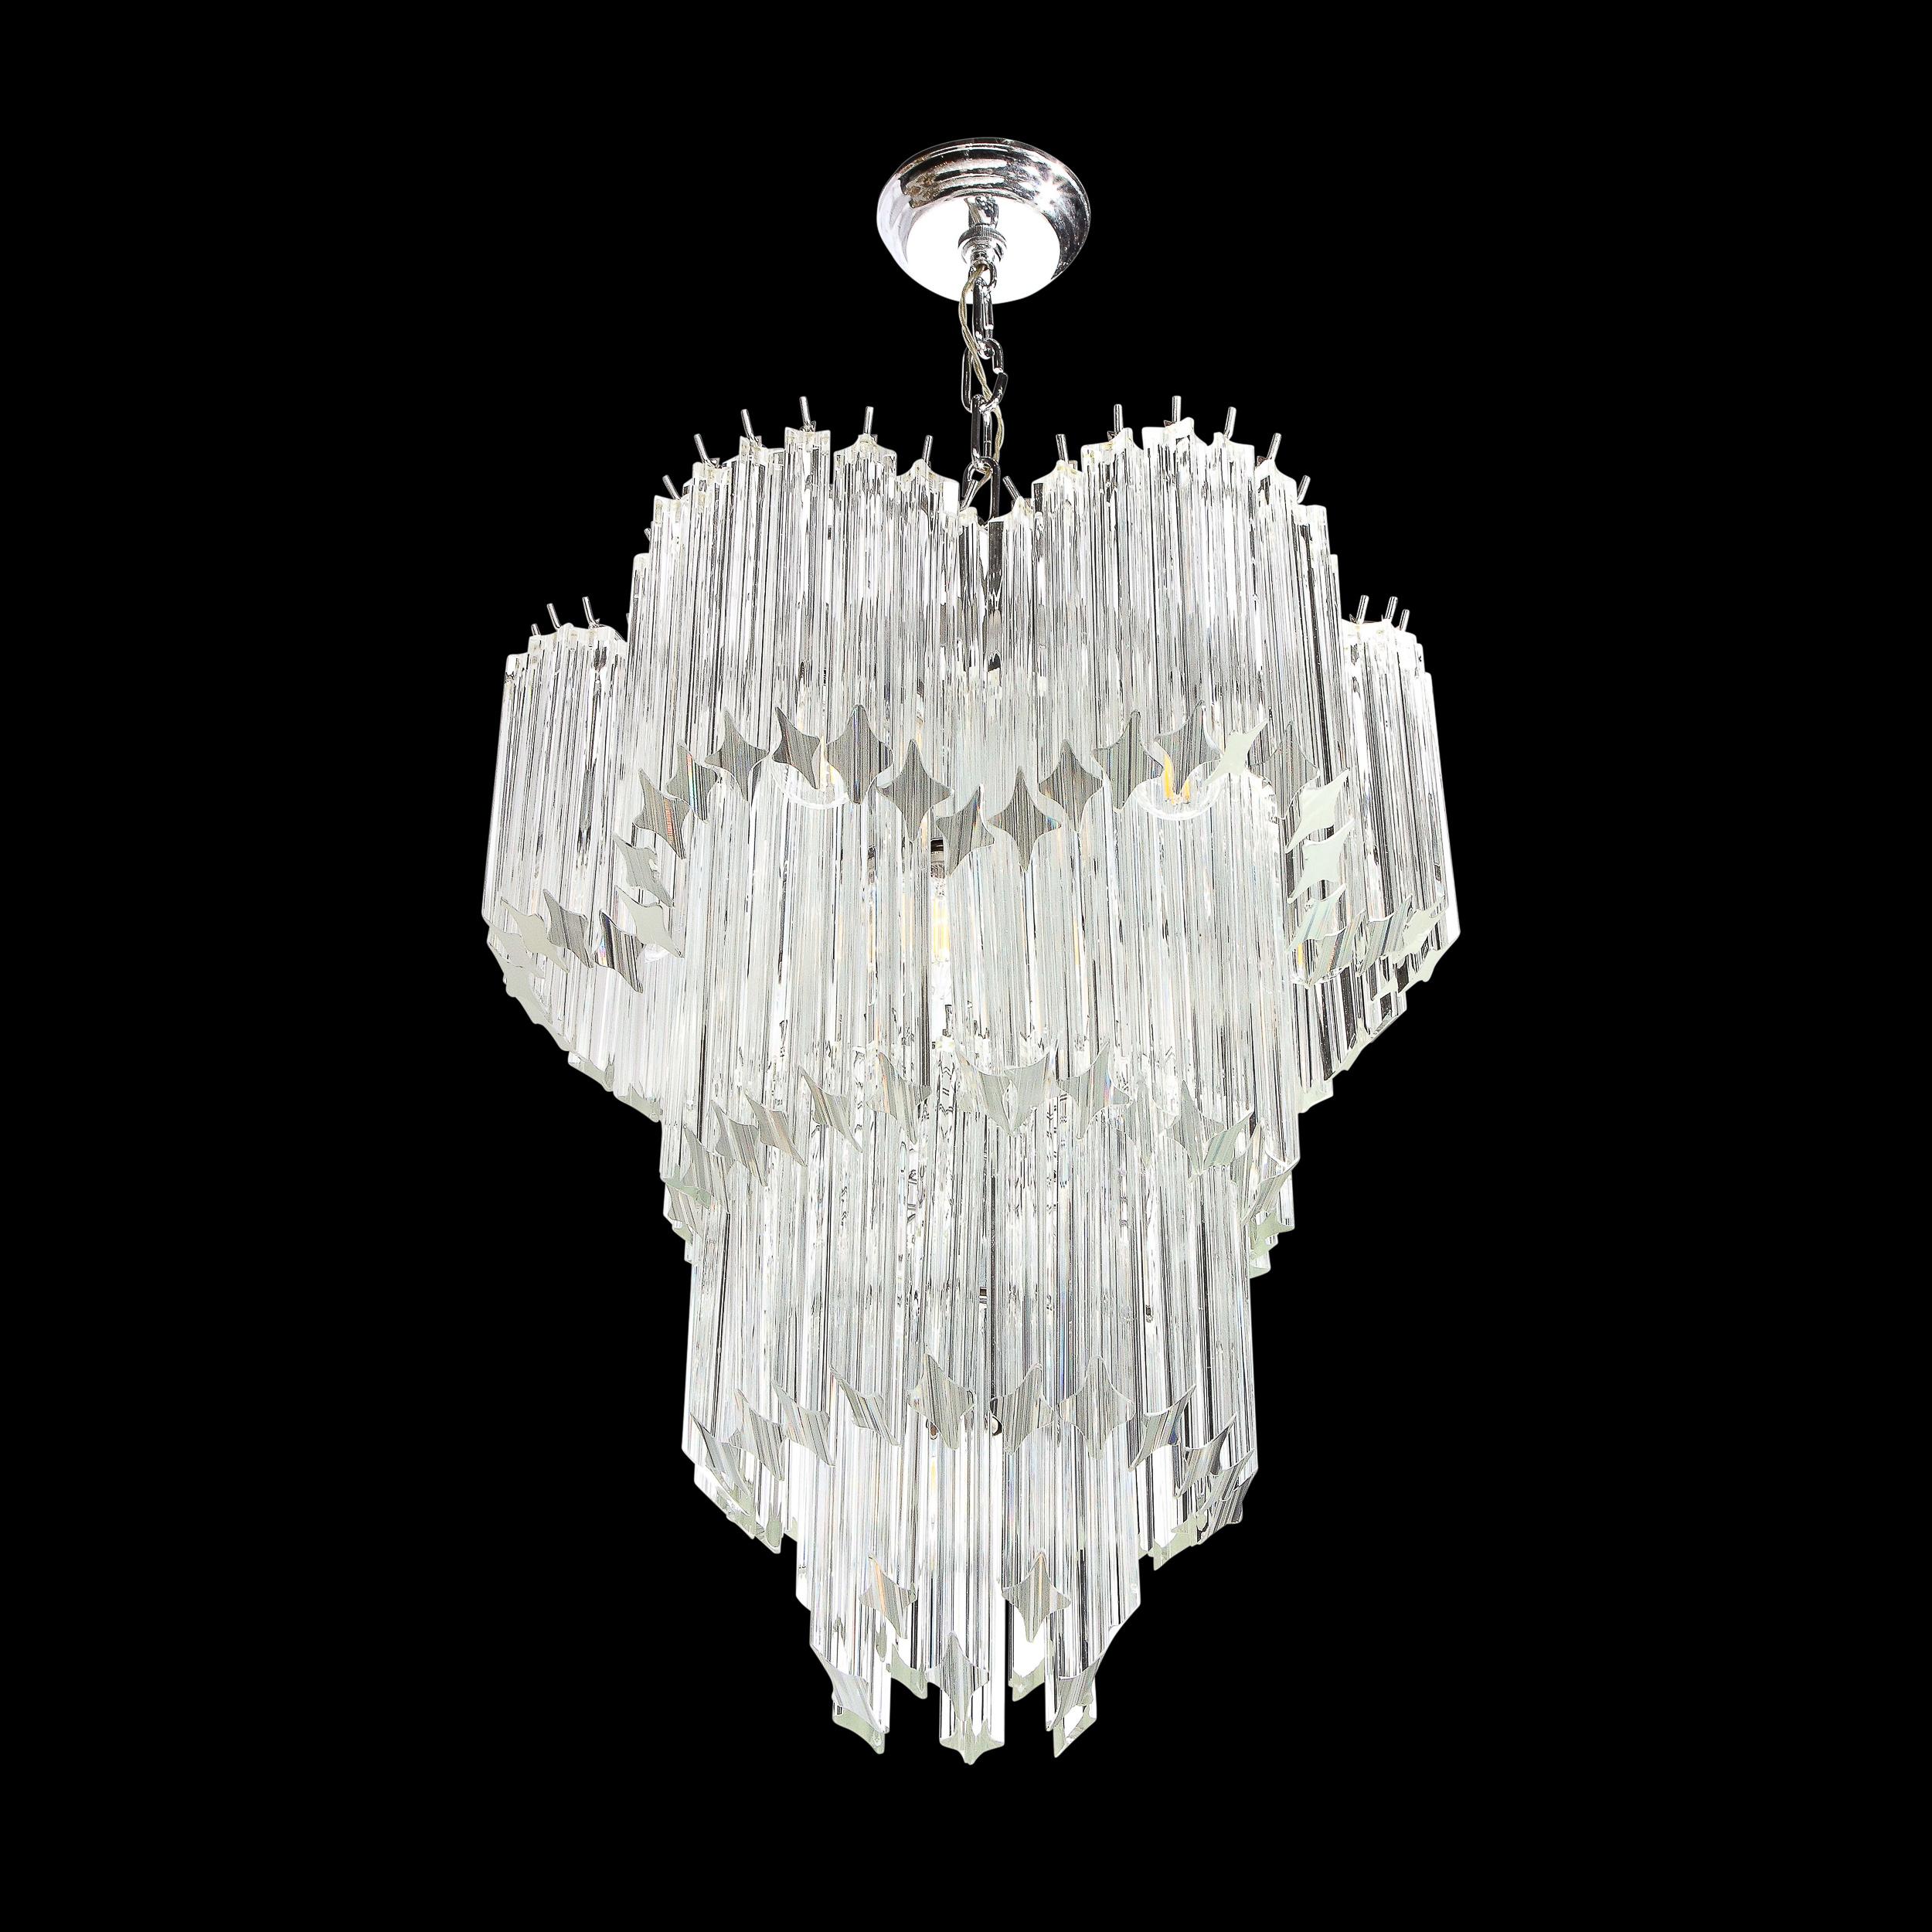 Mid-Century Modernist four-tier cut triedre crystal Camer chandelier. This chandelier features four-tiers of individually hung crystal triedre Camer rods. The top-tier features a scalloped designed border, giving the chandelier great dimension. The